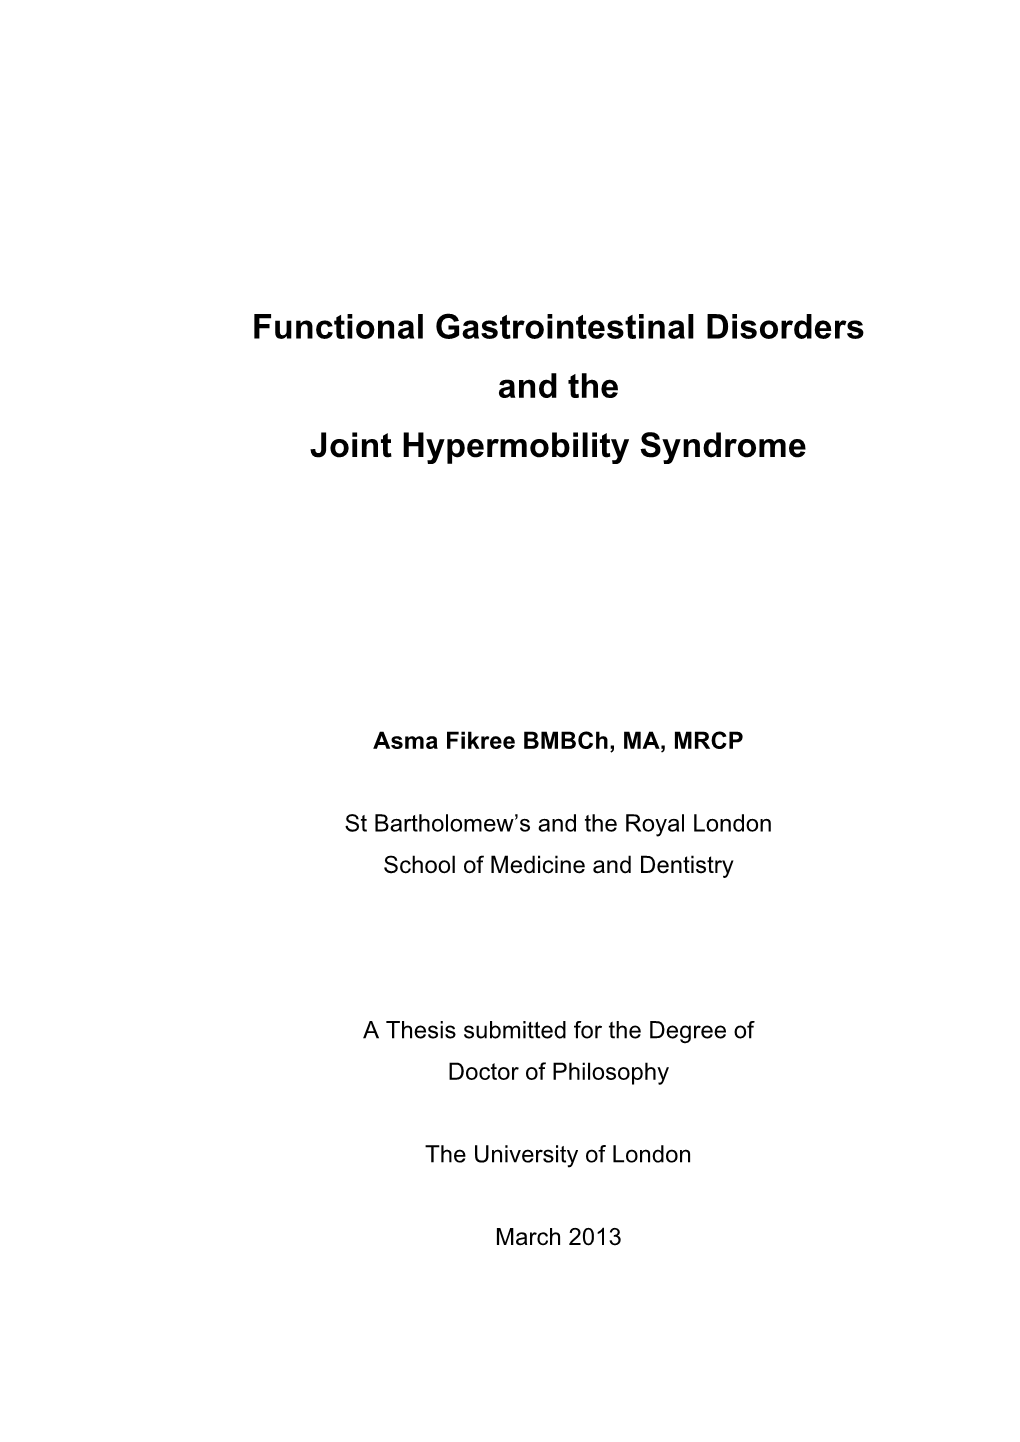 Functional Gastrointestinal Disorders and the Joint Hypermobility Syndrome